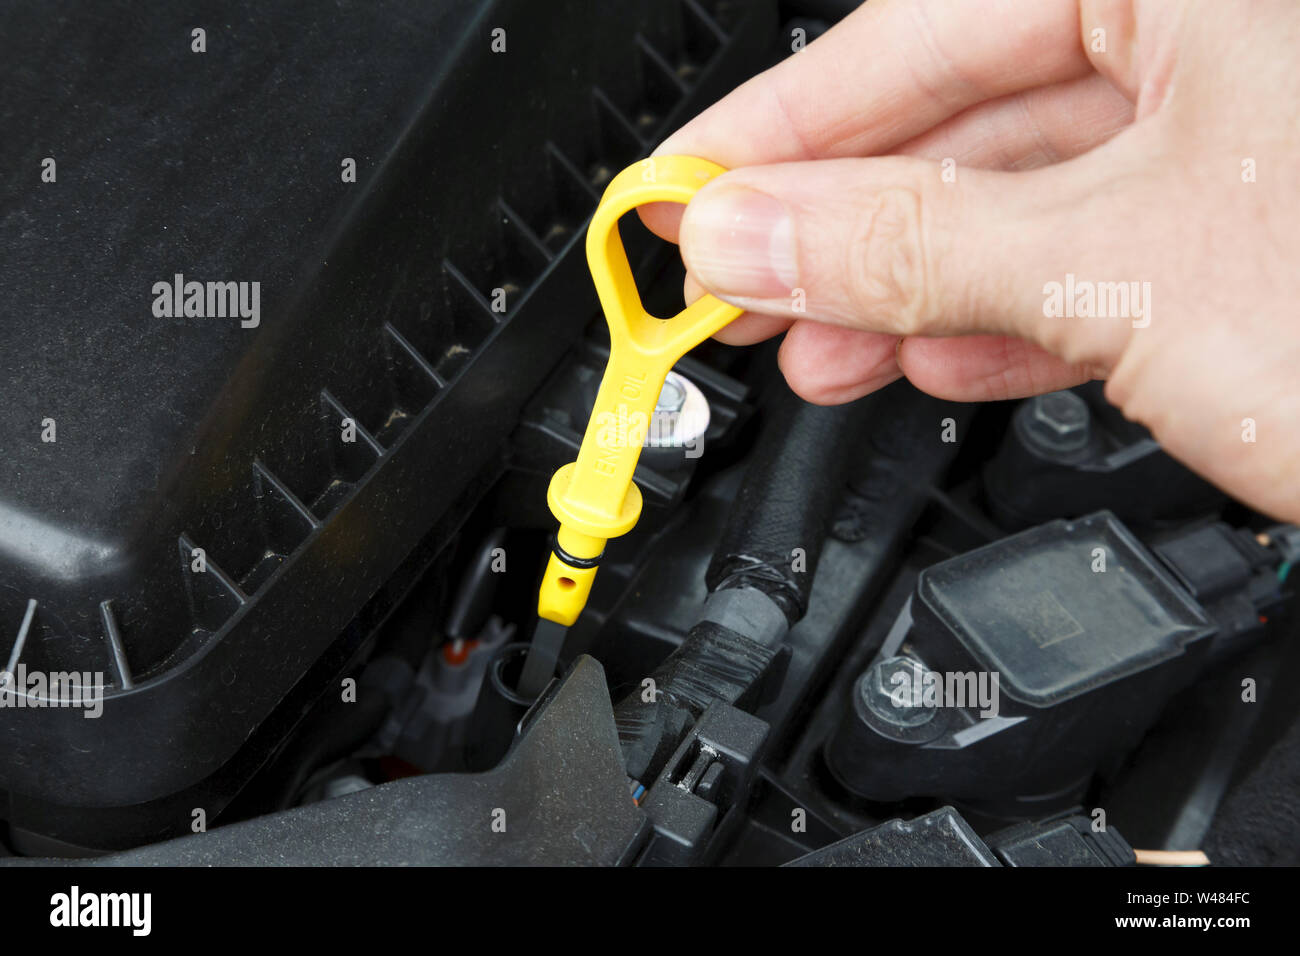 Hand holding a dipstick to check the oil level in a car engine. Stock Photo